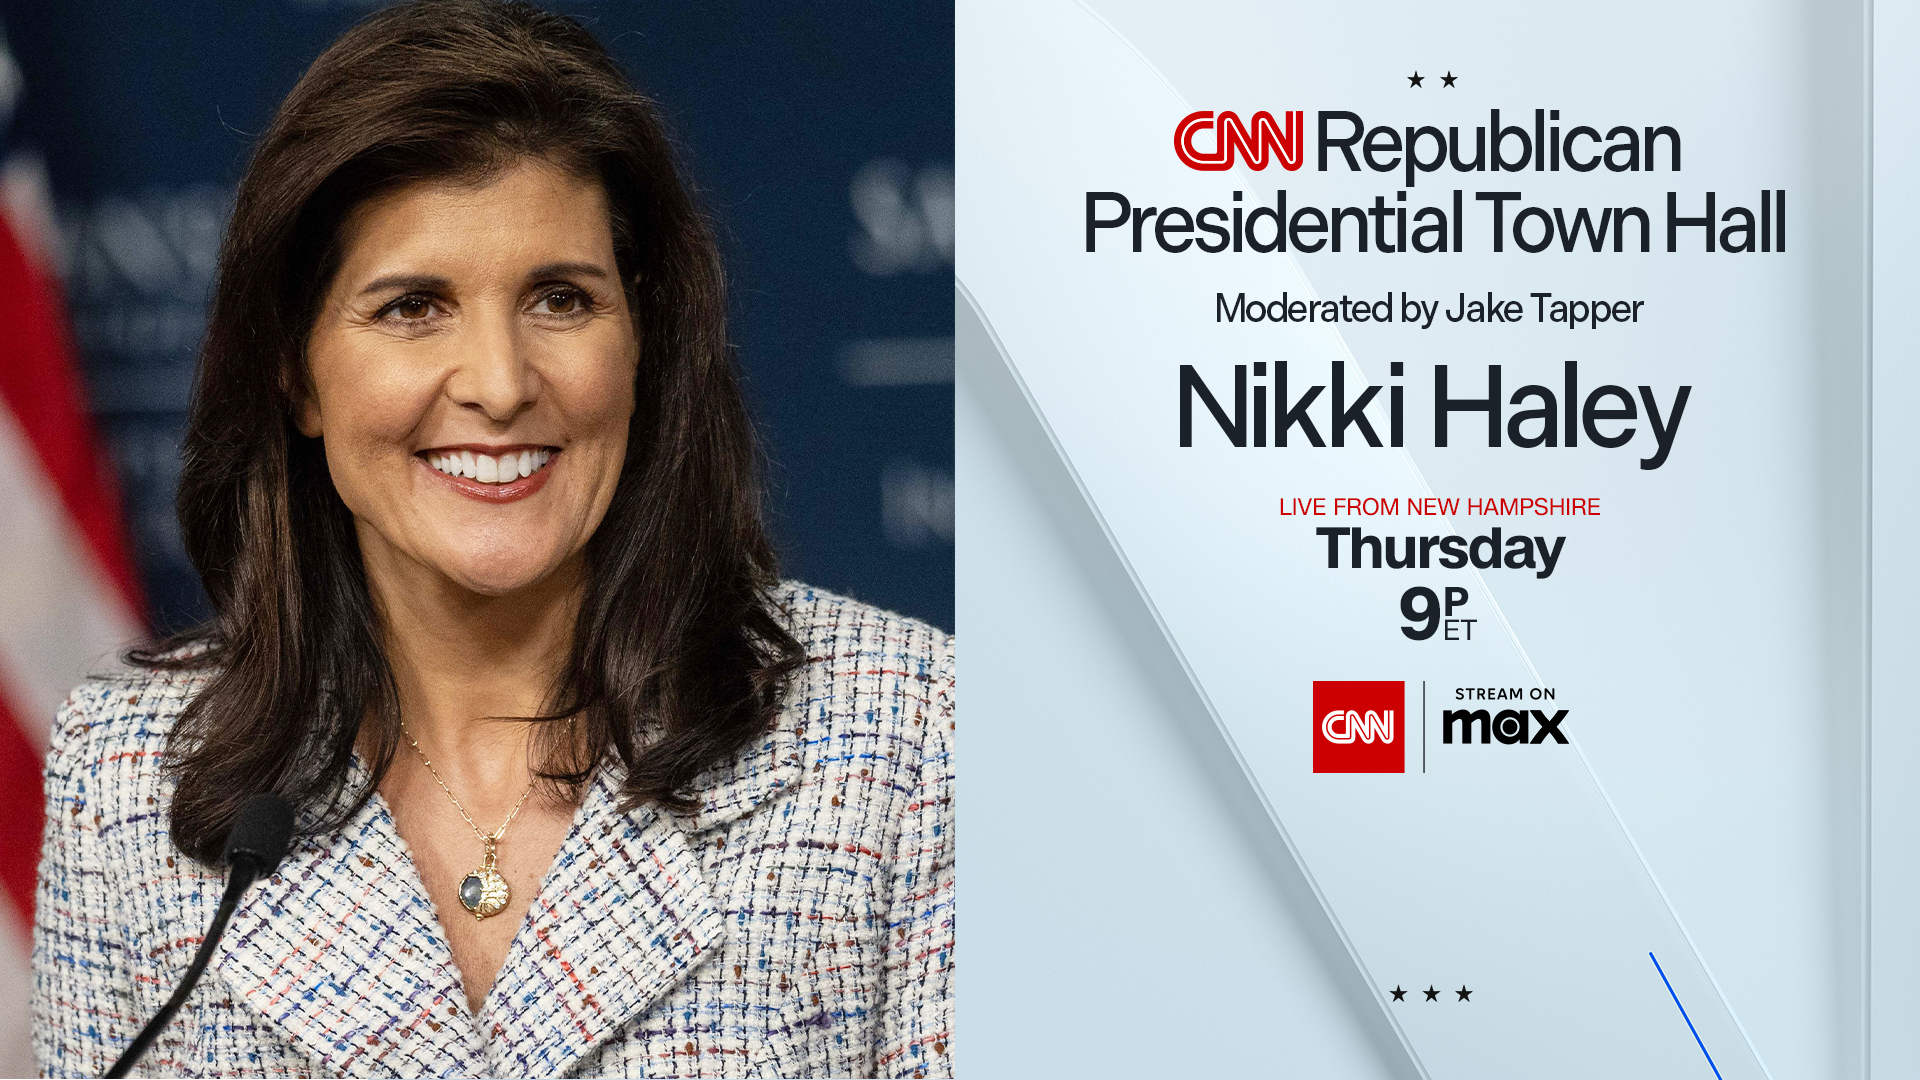 NEC Hosts CNN Town Hall Meeting with Nikki Haley | New England College